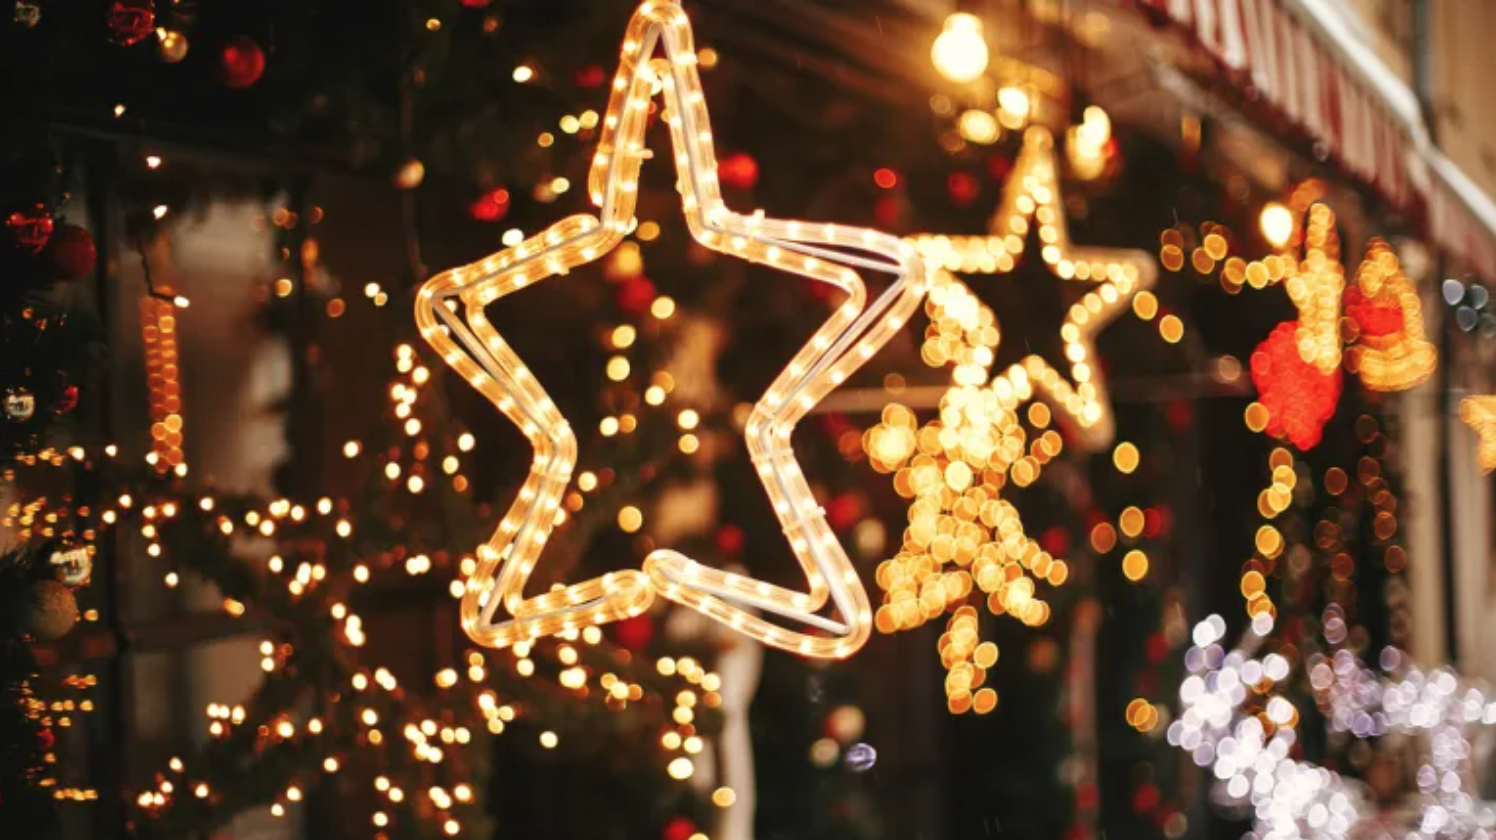 star-shaped holiday lights hang against a backdrop of greenery and storefronts